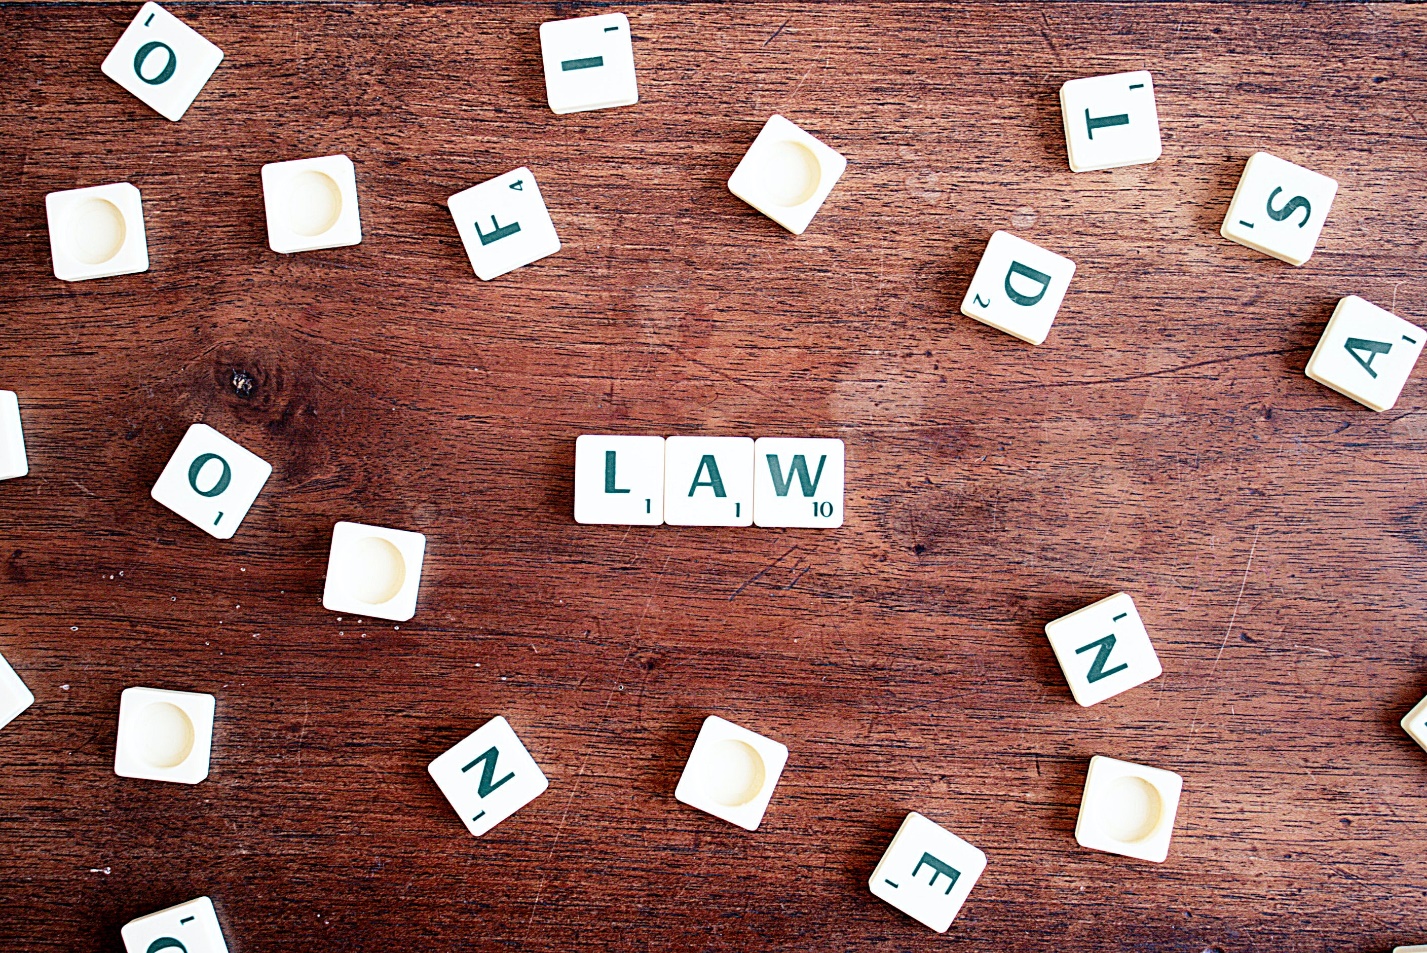 The differences between civil law and criminal law in the UK